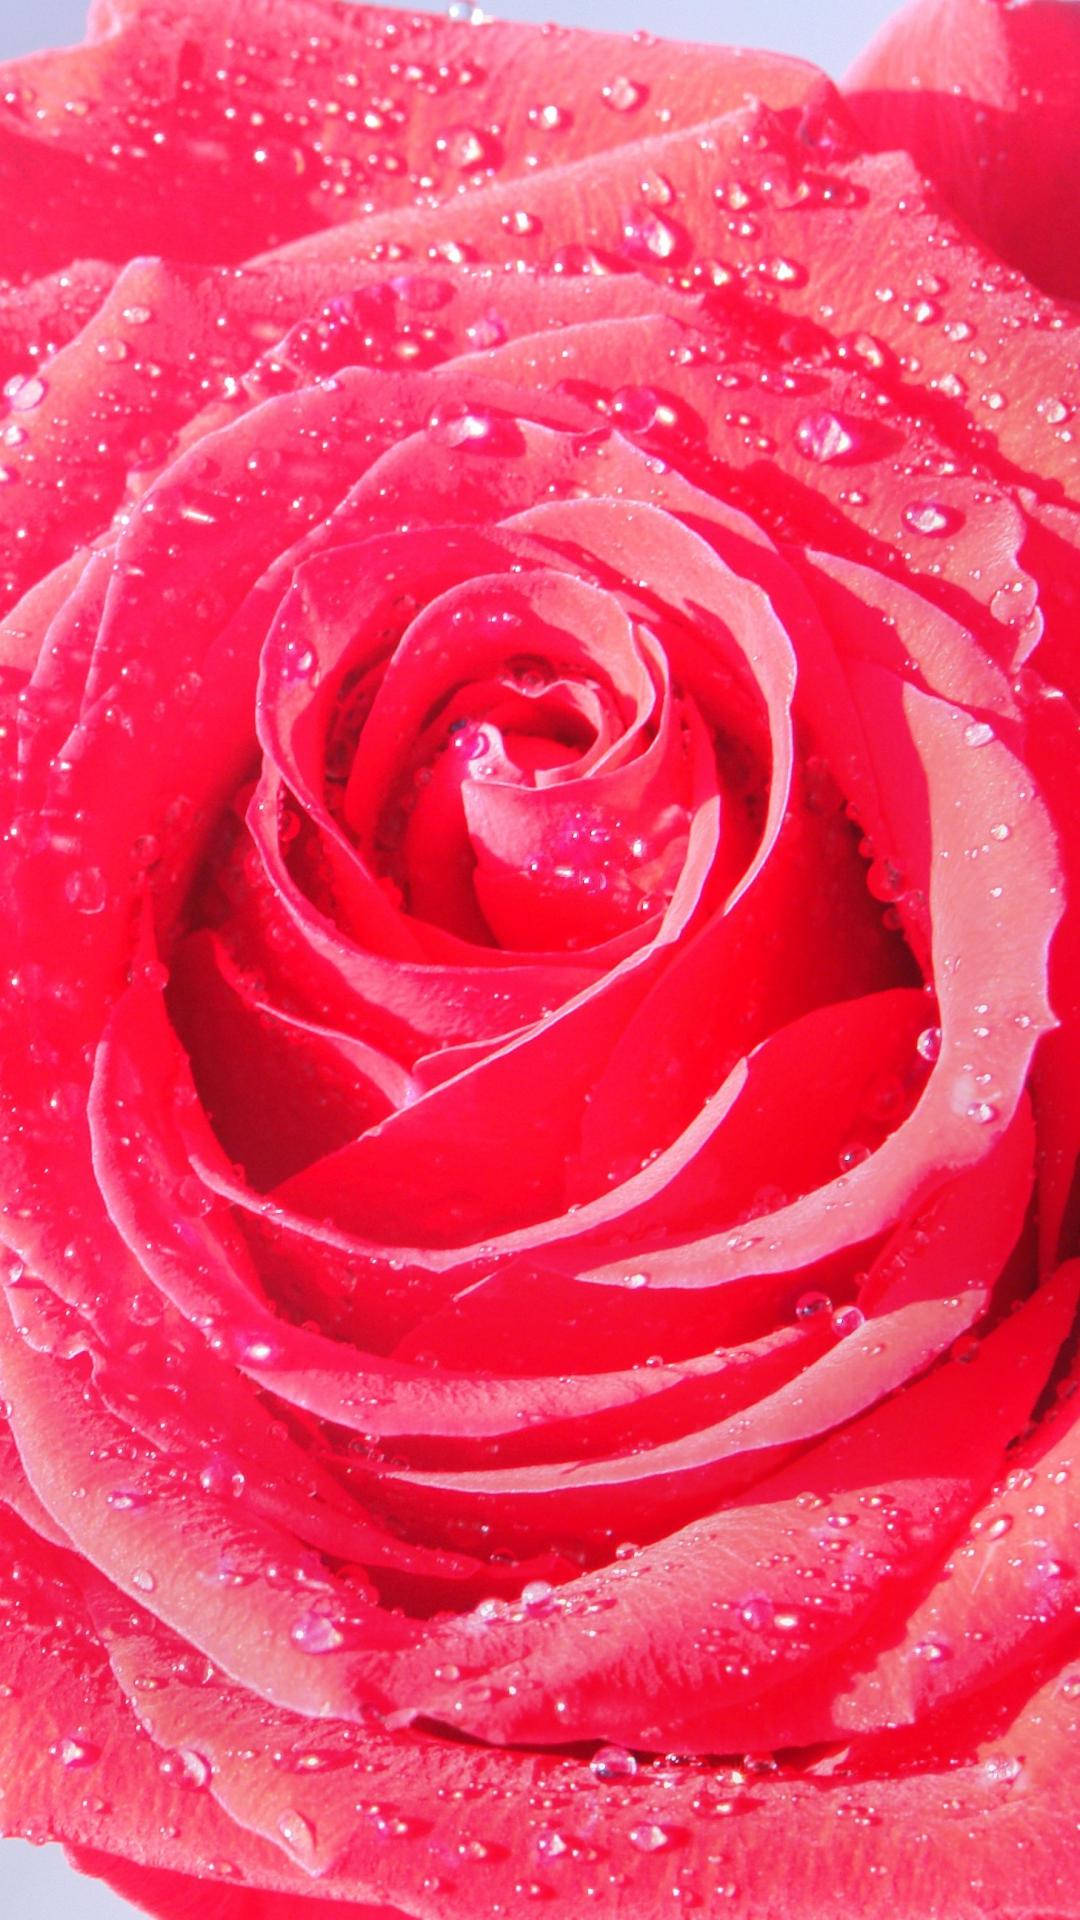 A Stunning Macro Shot Of A Pink Rose Bloomed To Perfection On An Iphone. Background